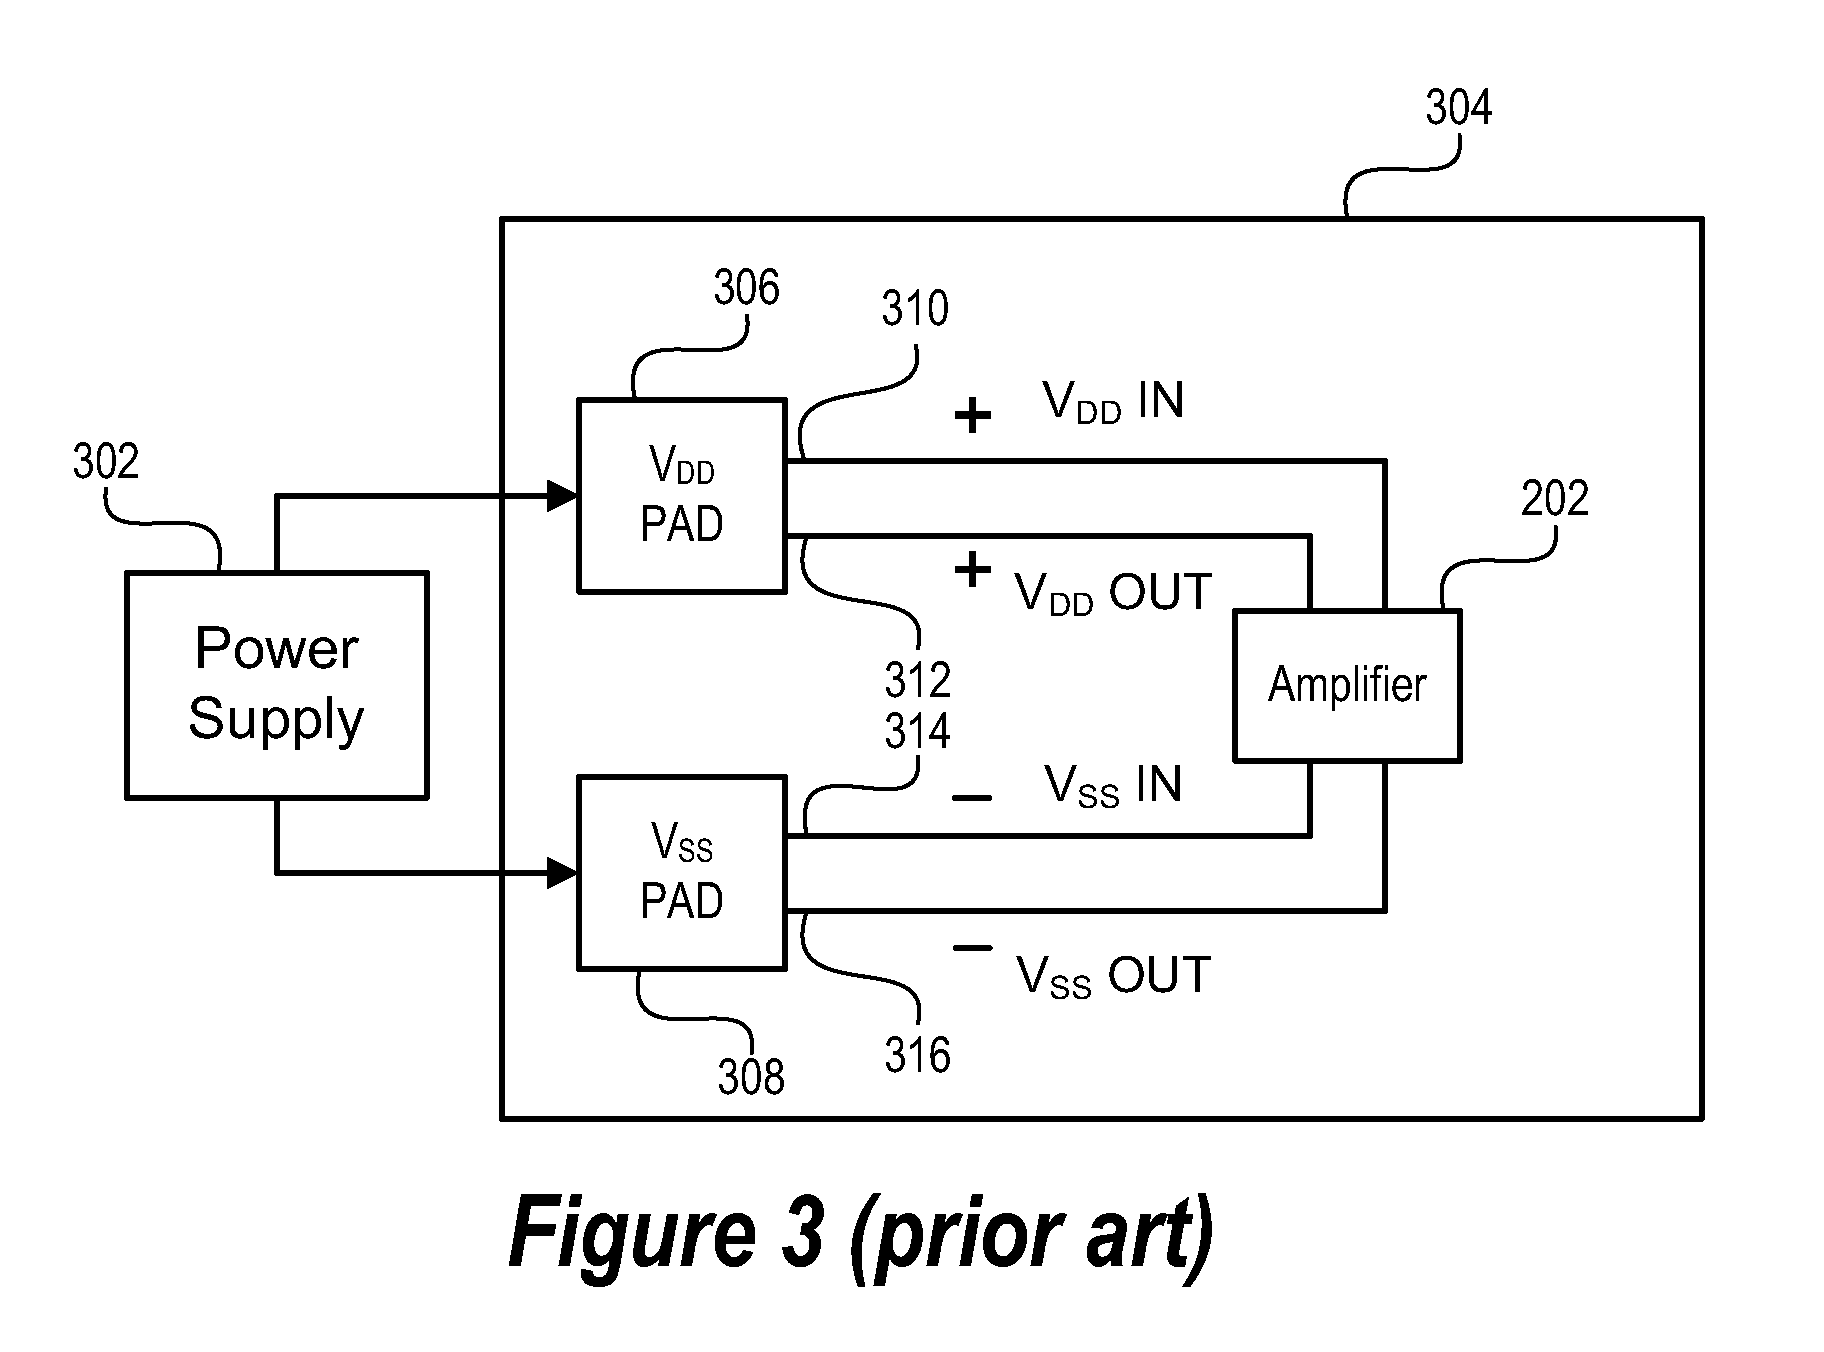 Multi-stage amplifier with multiple sets of fixed and variable voltage rails